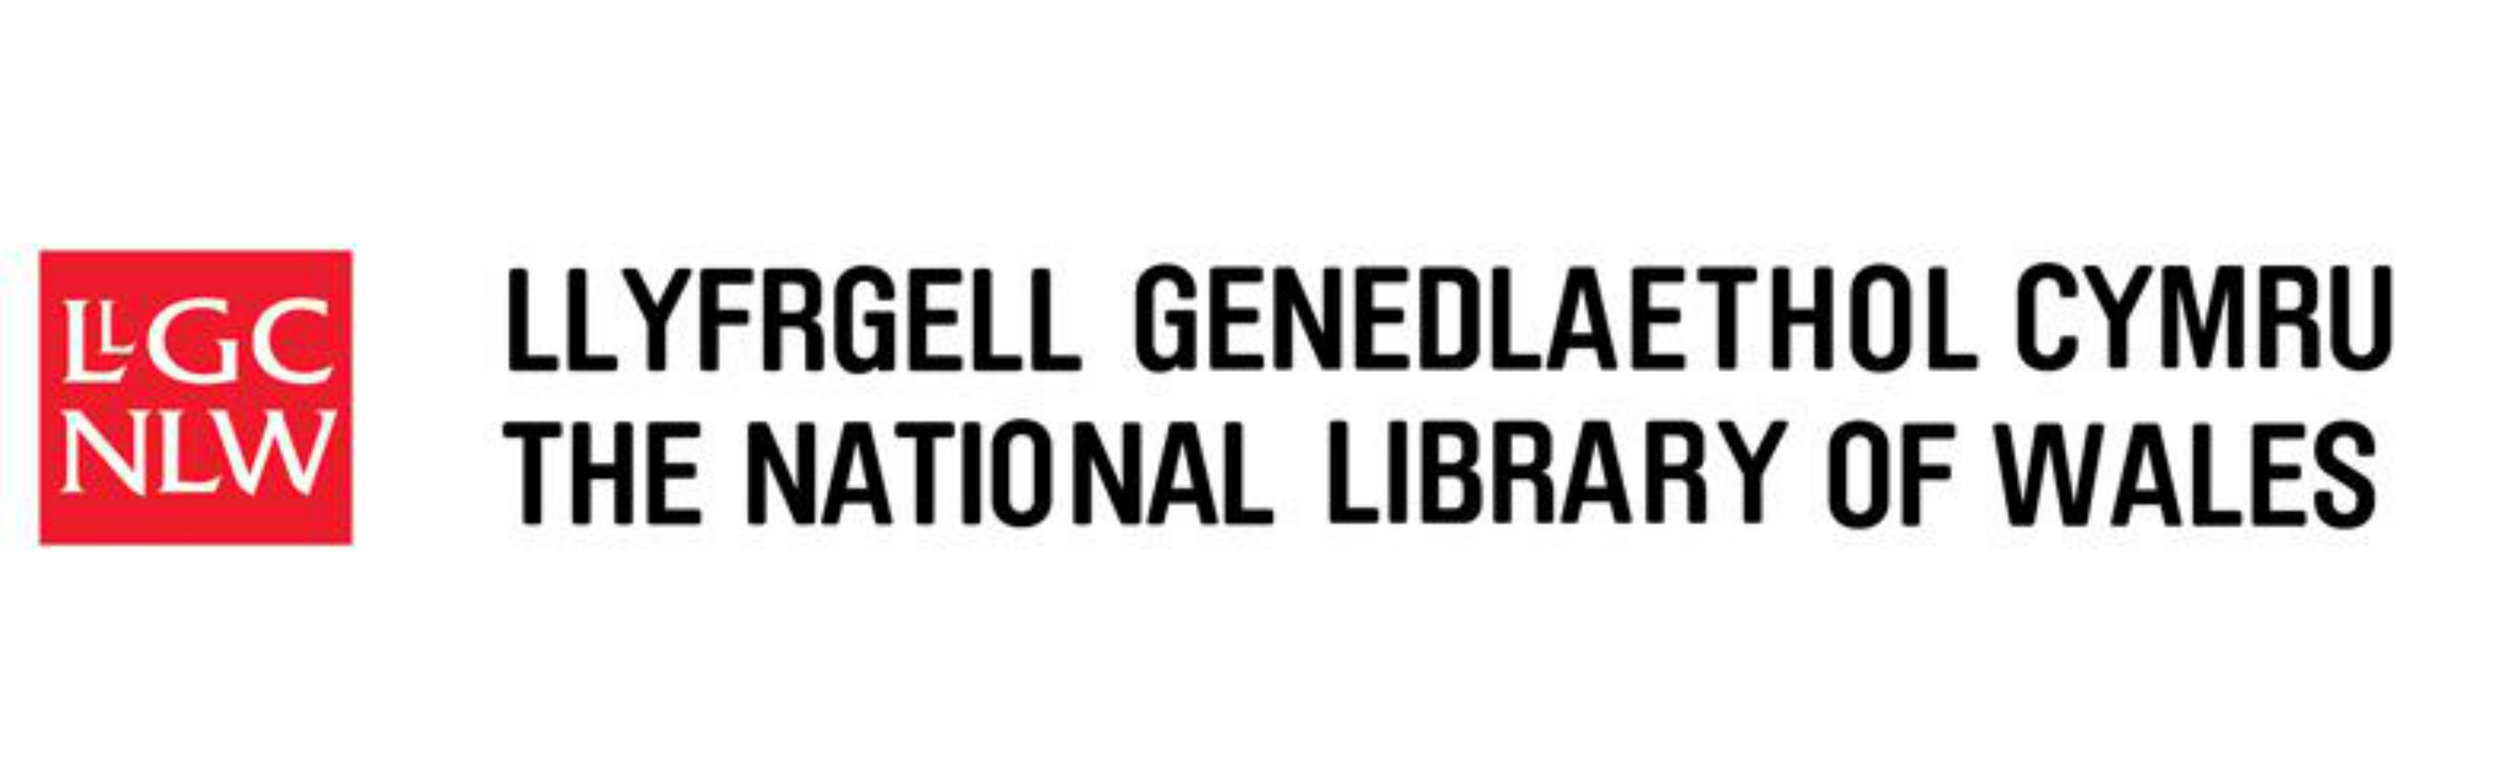 national_library_of_wales_archive_on_logo_template_0.jpg